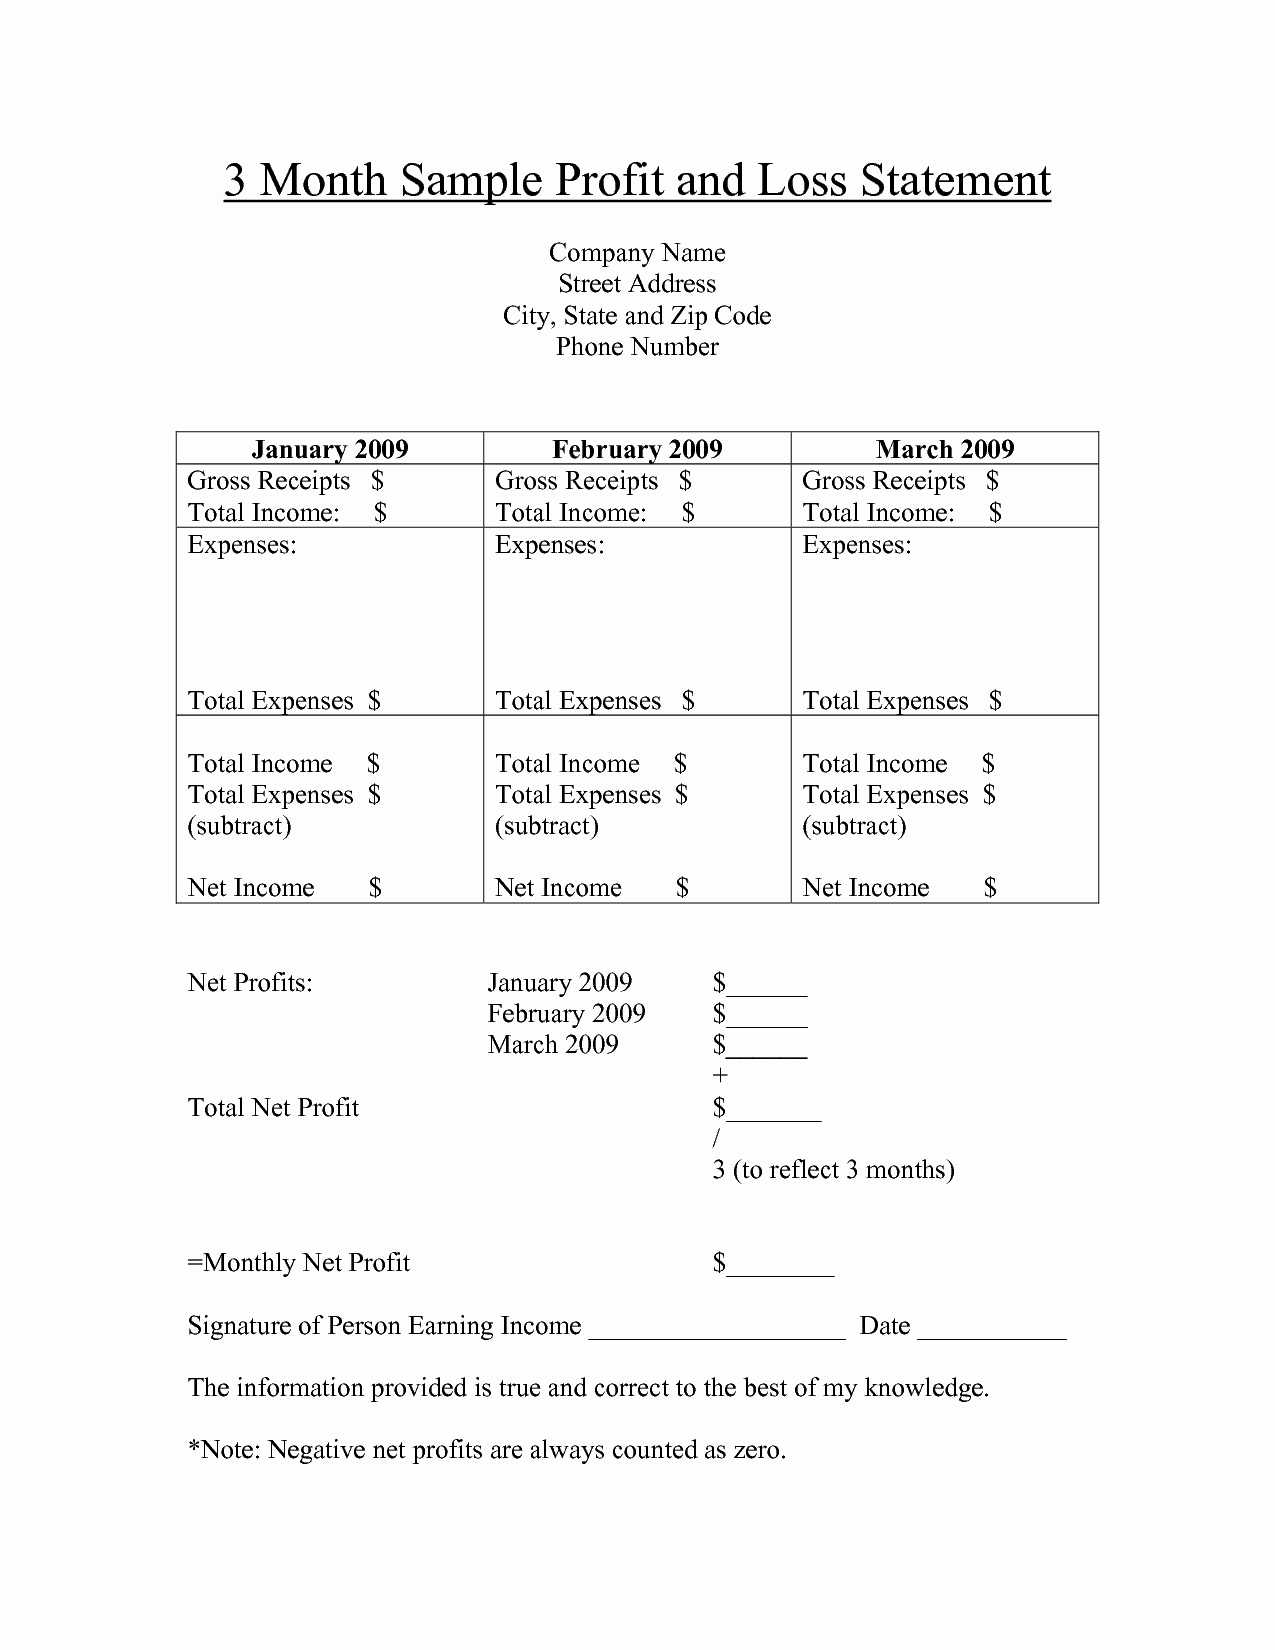 Profit and Loss Statements Examples Lovely Free Printable Profit and Loss Statement form for Home